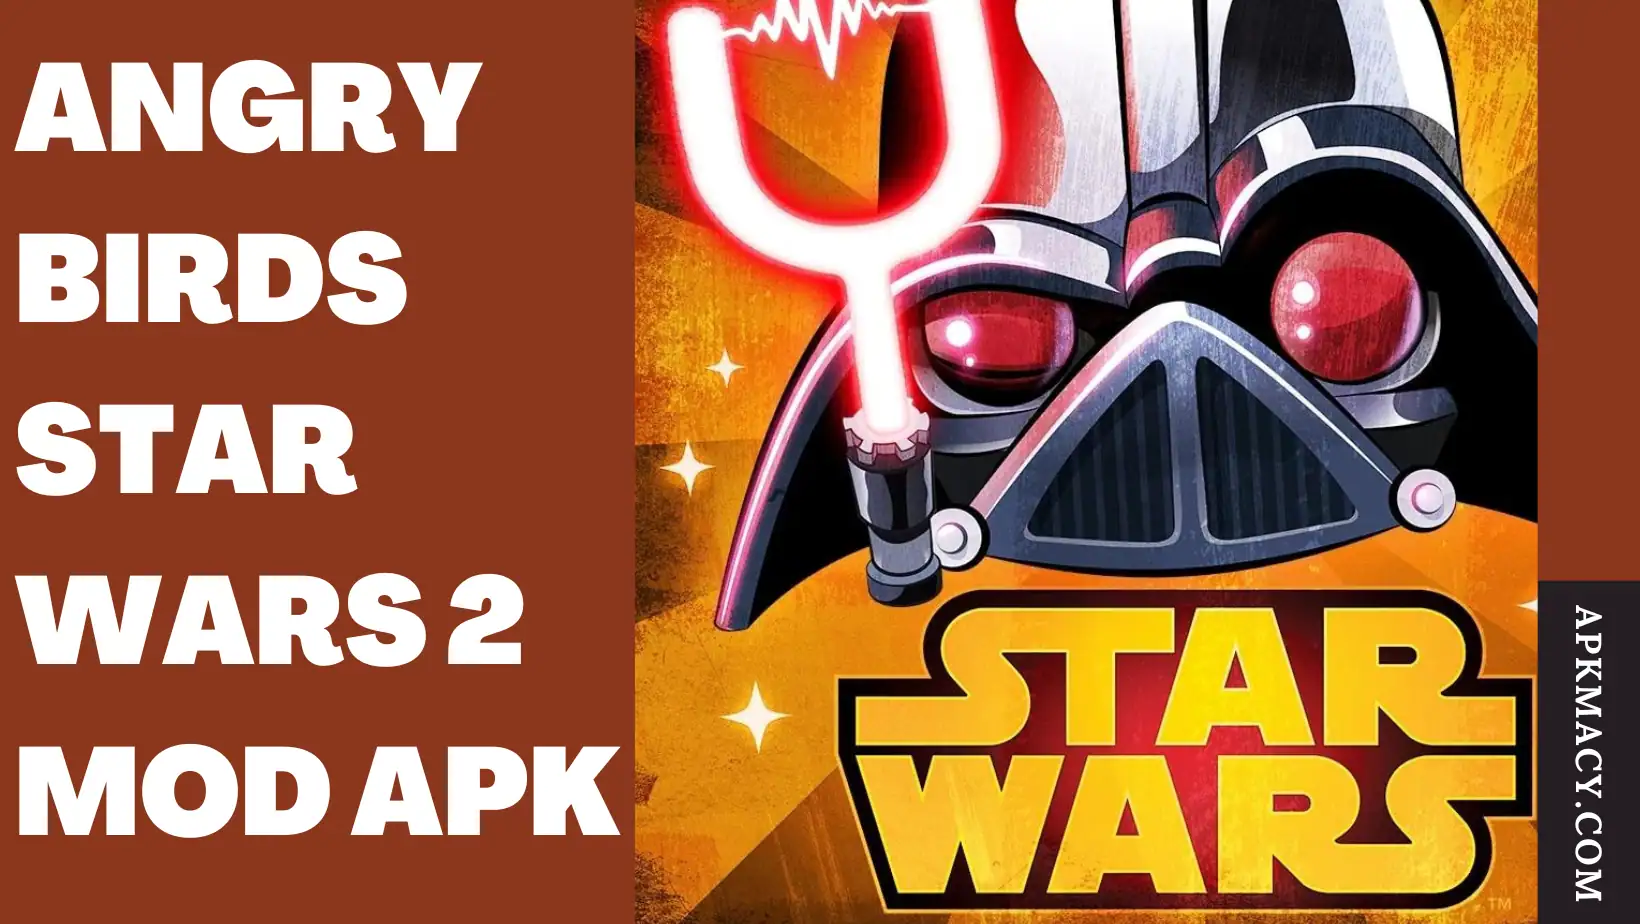 Download Angry Birds Star Wars II (Mod Money) 1.9.25mod APK For Android